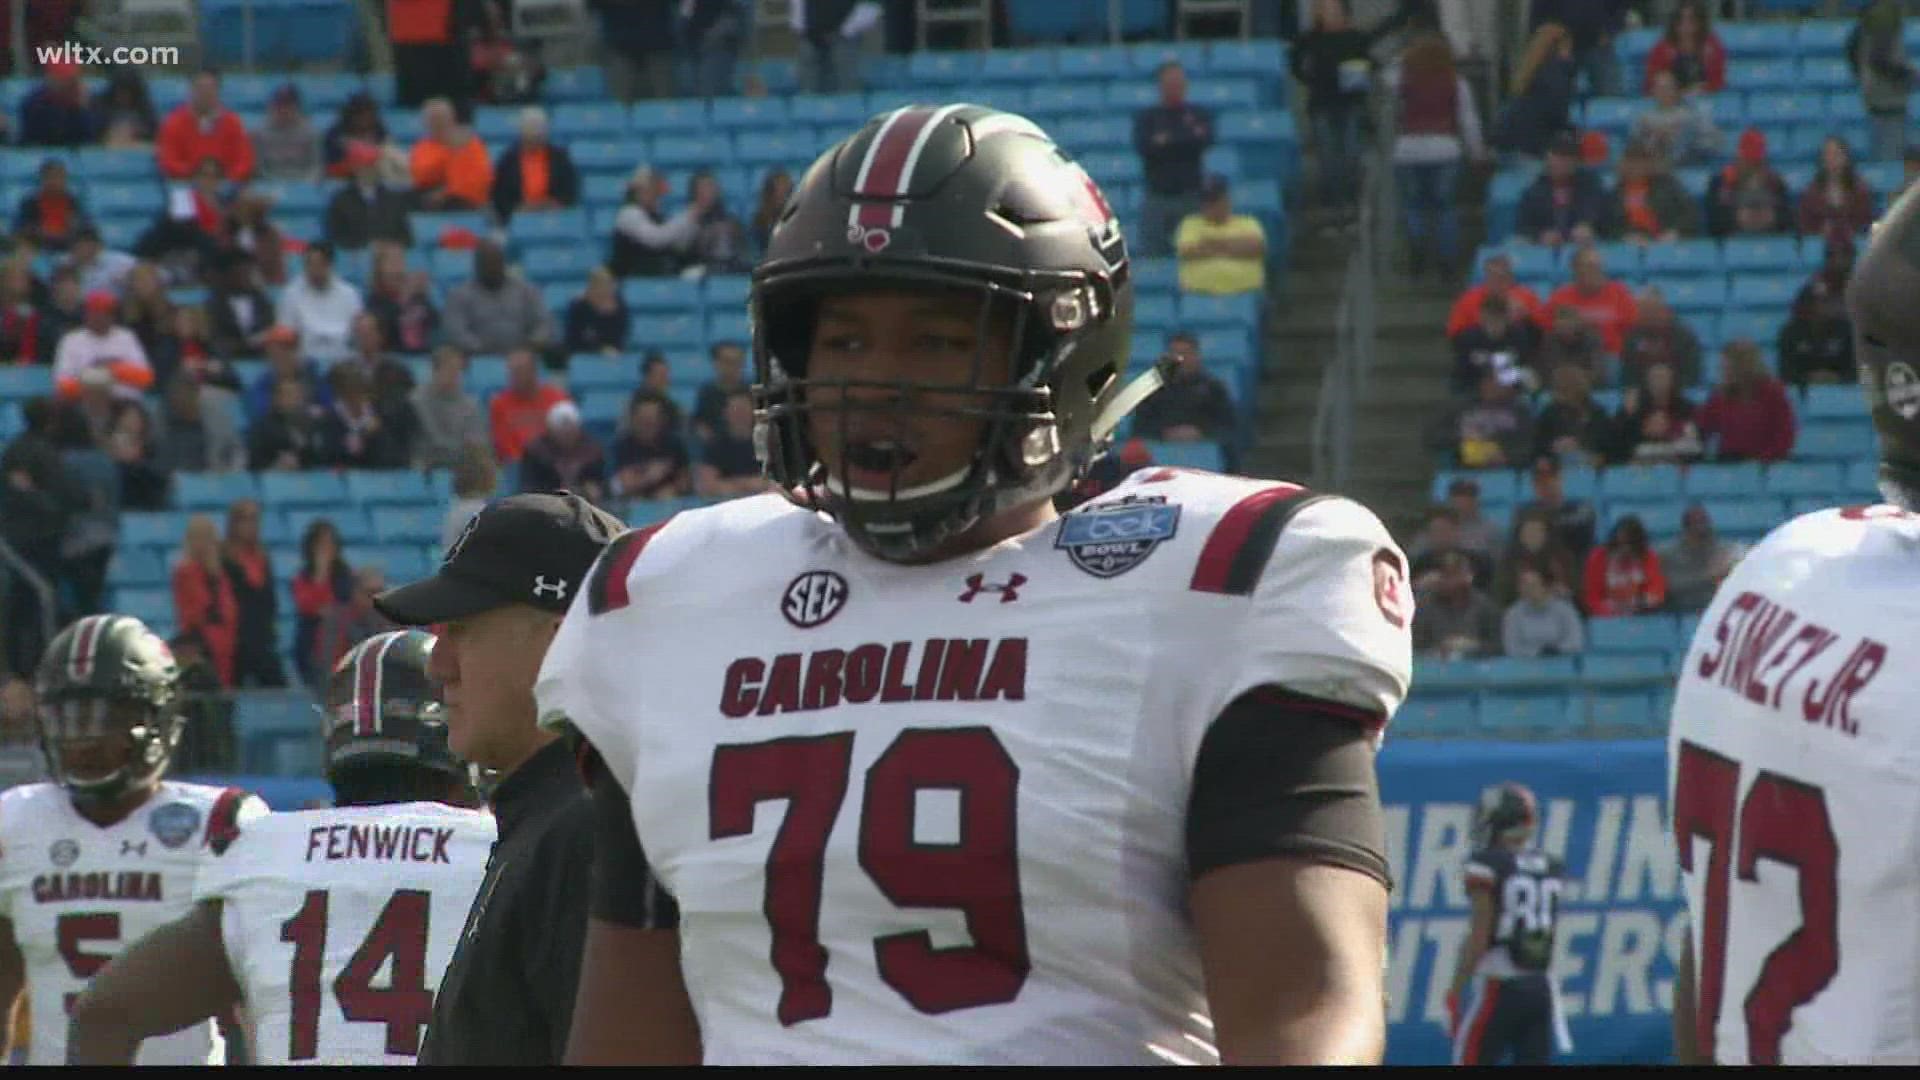 South Carolina offensive tackle Dylan Wonnum and Georgia State center Malik Sumter will both gear up for one more run at their respective schools.